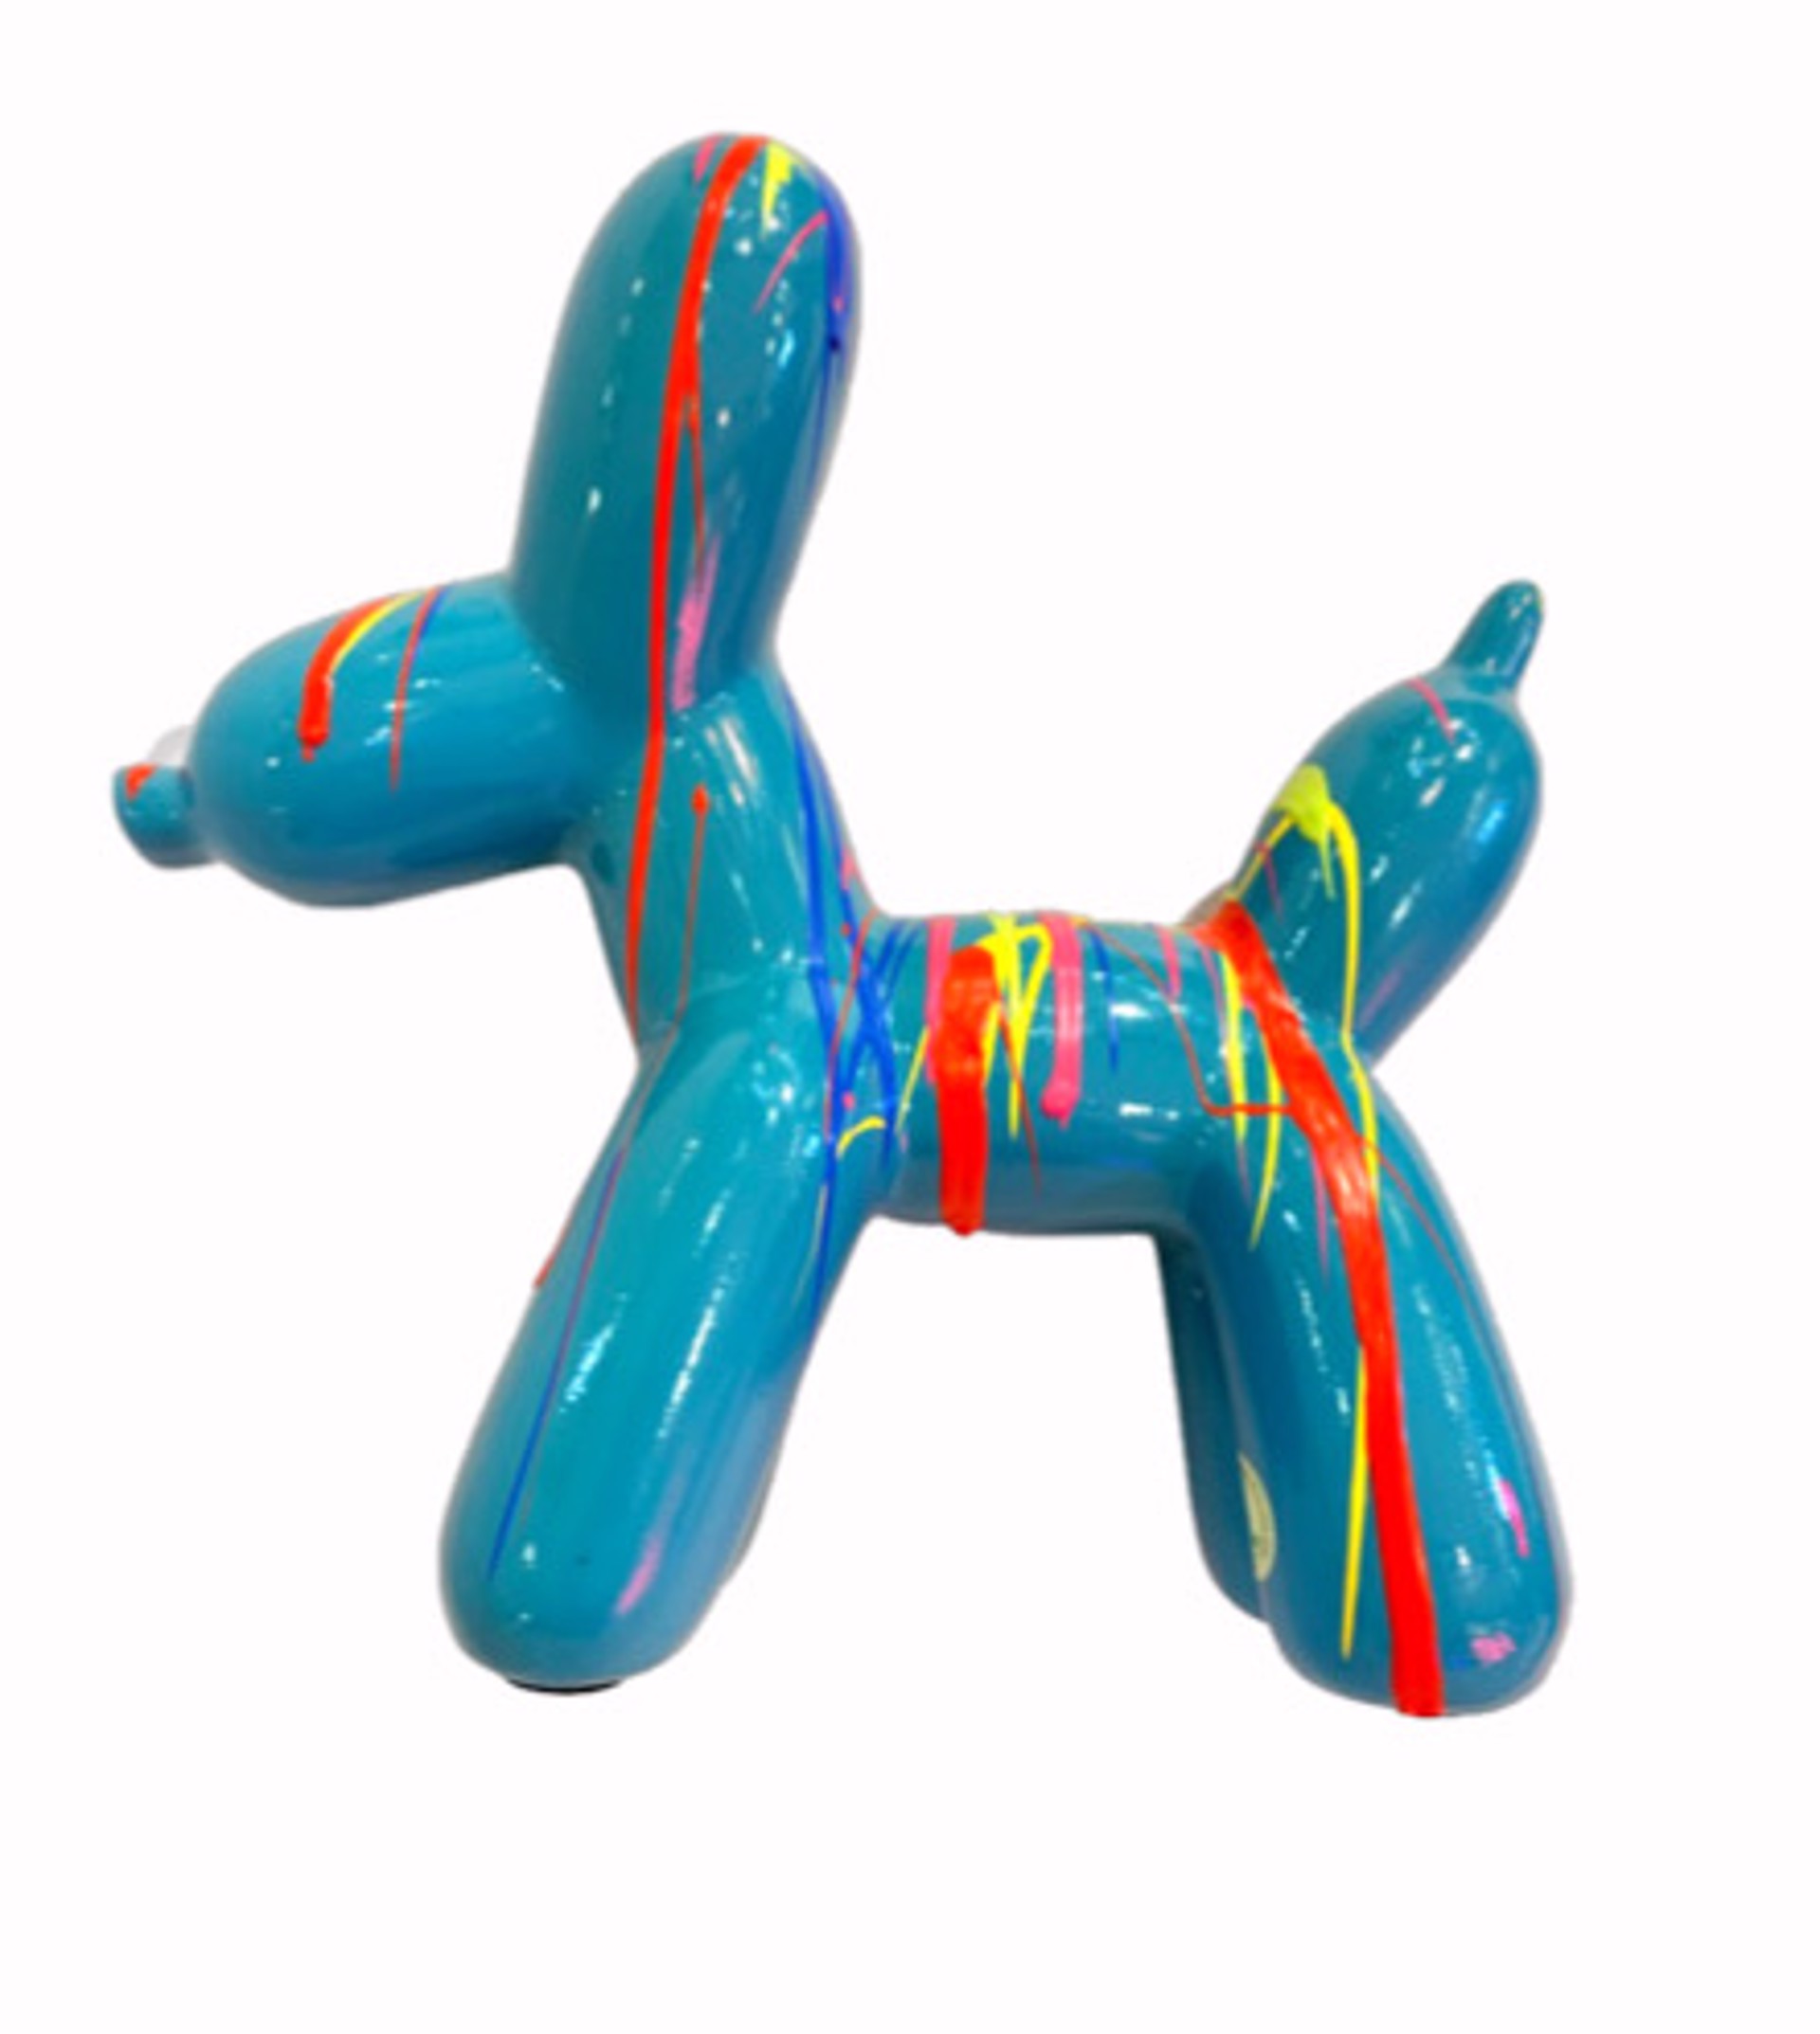 Toy Collection “Balloon Dog”